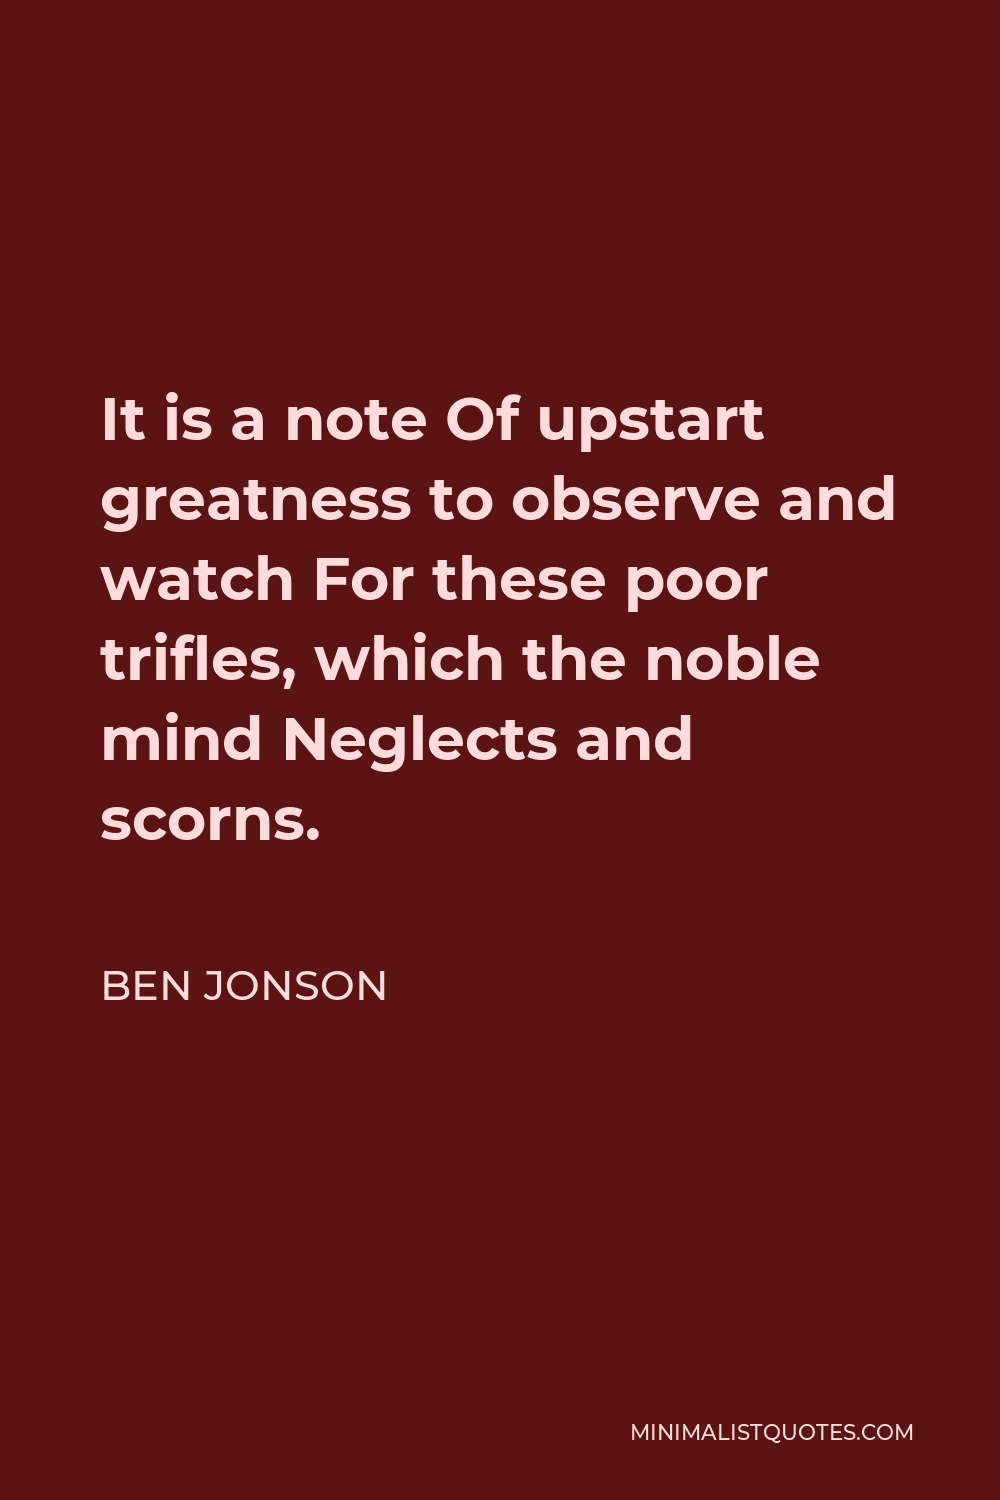 Ben Jonson Quote - It is a note Of upstart greatness to observe and watch For these poor trifles, which the noble mind Neglects and scorns.